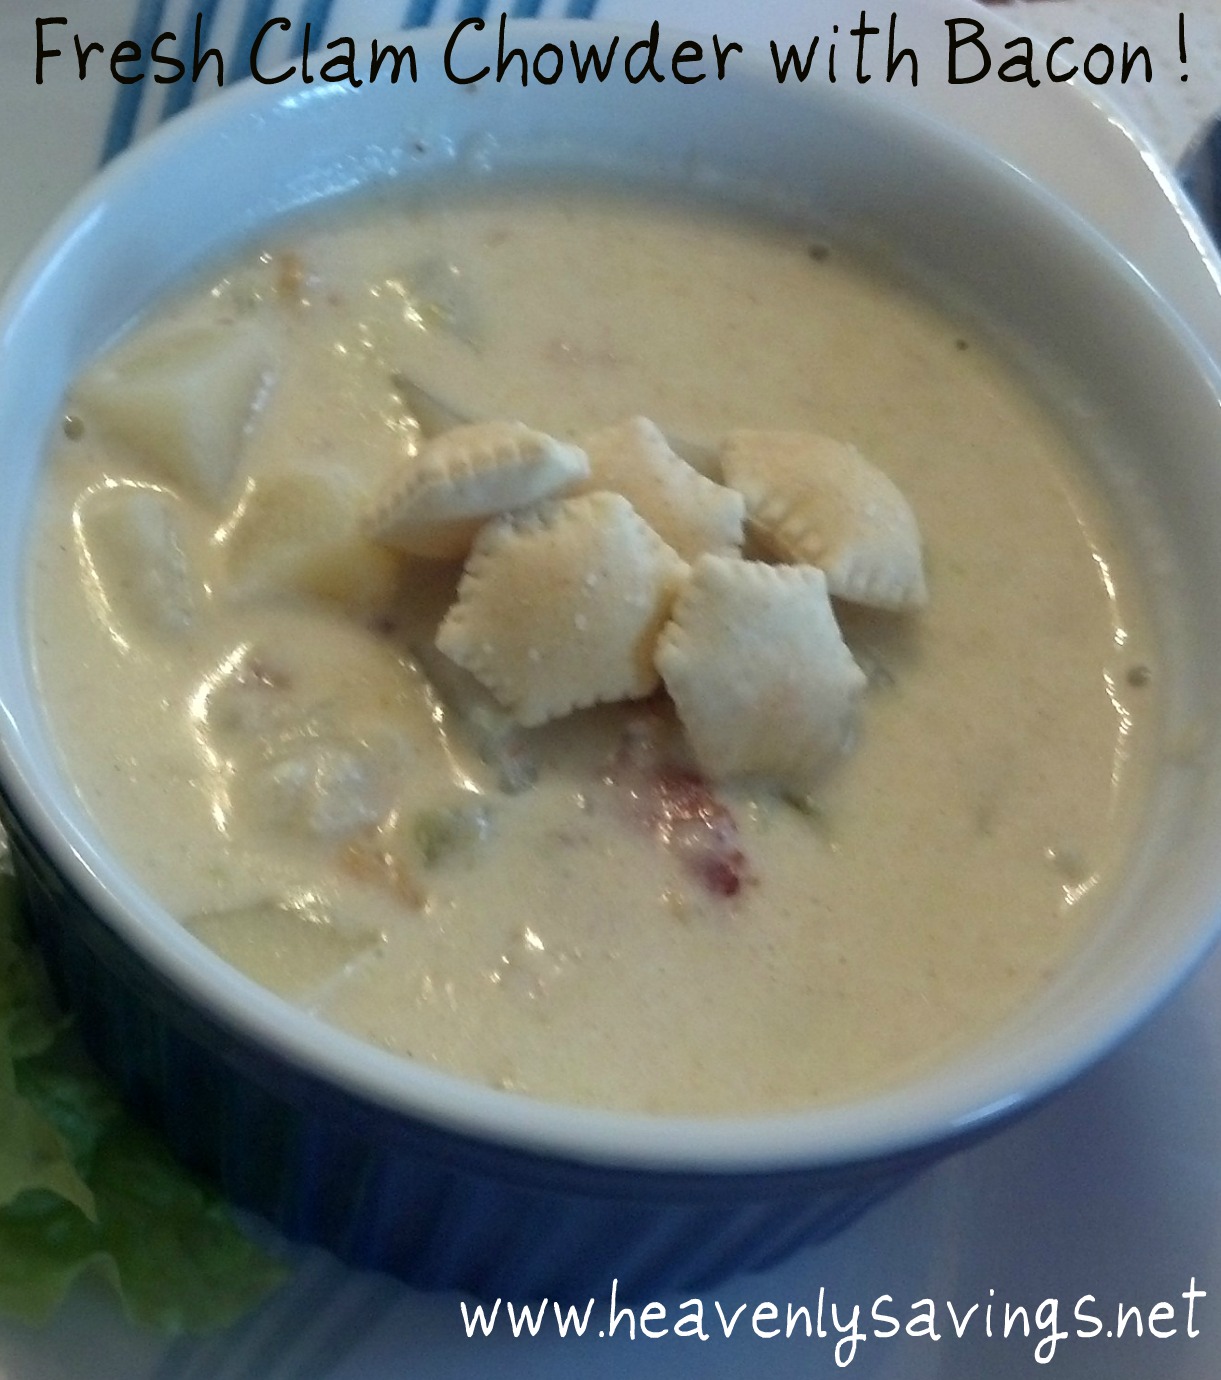 The Best Homemade Clam Chowder With Bacon!